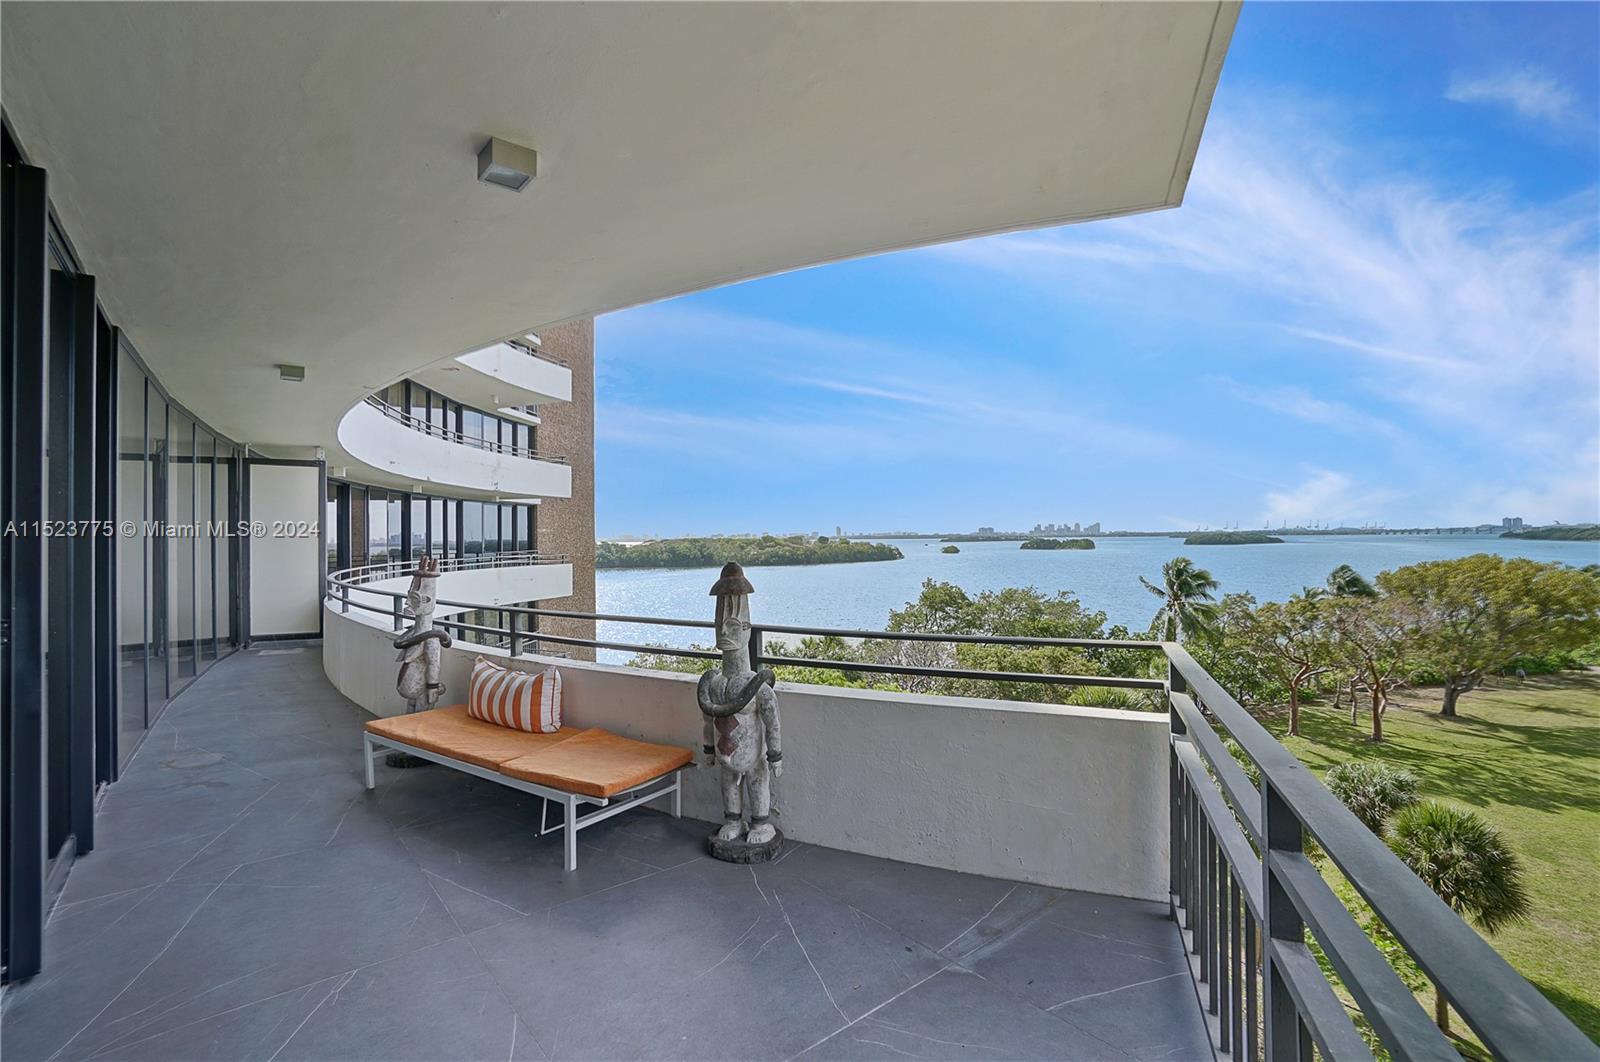 Welcome to this breathtaking condo in Palm Bay Tower, where location meets views! Close to Miami's hidden gem, the MiMo District, this stunning 2 bedroom unit is on the perfect floor to have an exquisite mix of views of the pristine waters of Biscayne Bay, lush greenery, and Miami's magnificent city. Spacious at 1763 Sq.ft and with over $350K invested, this unit was upgraded with an Interior Designer's touch and has wide walls with built-in shelves, porcelain floors in large format, floor-to-ceiling windows, and two large 350 Sq.ft terraces that allow you to enjoy the expansive views while soaking up sunshine. The apartment has electric privacy shades and is wired with Sonos speakers in every room. The marina is being completely redone with a newly decorated lounge. Come see this today!